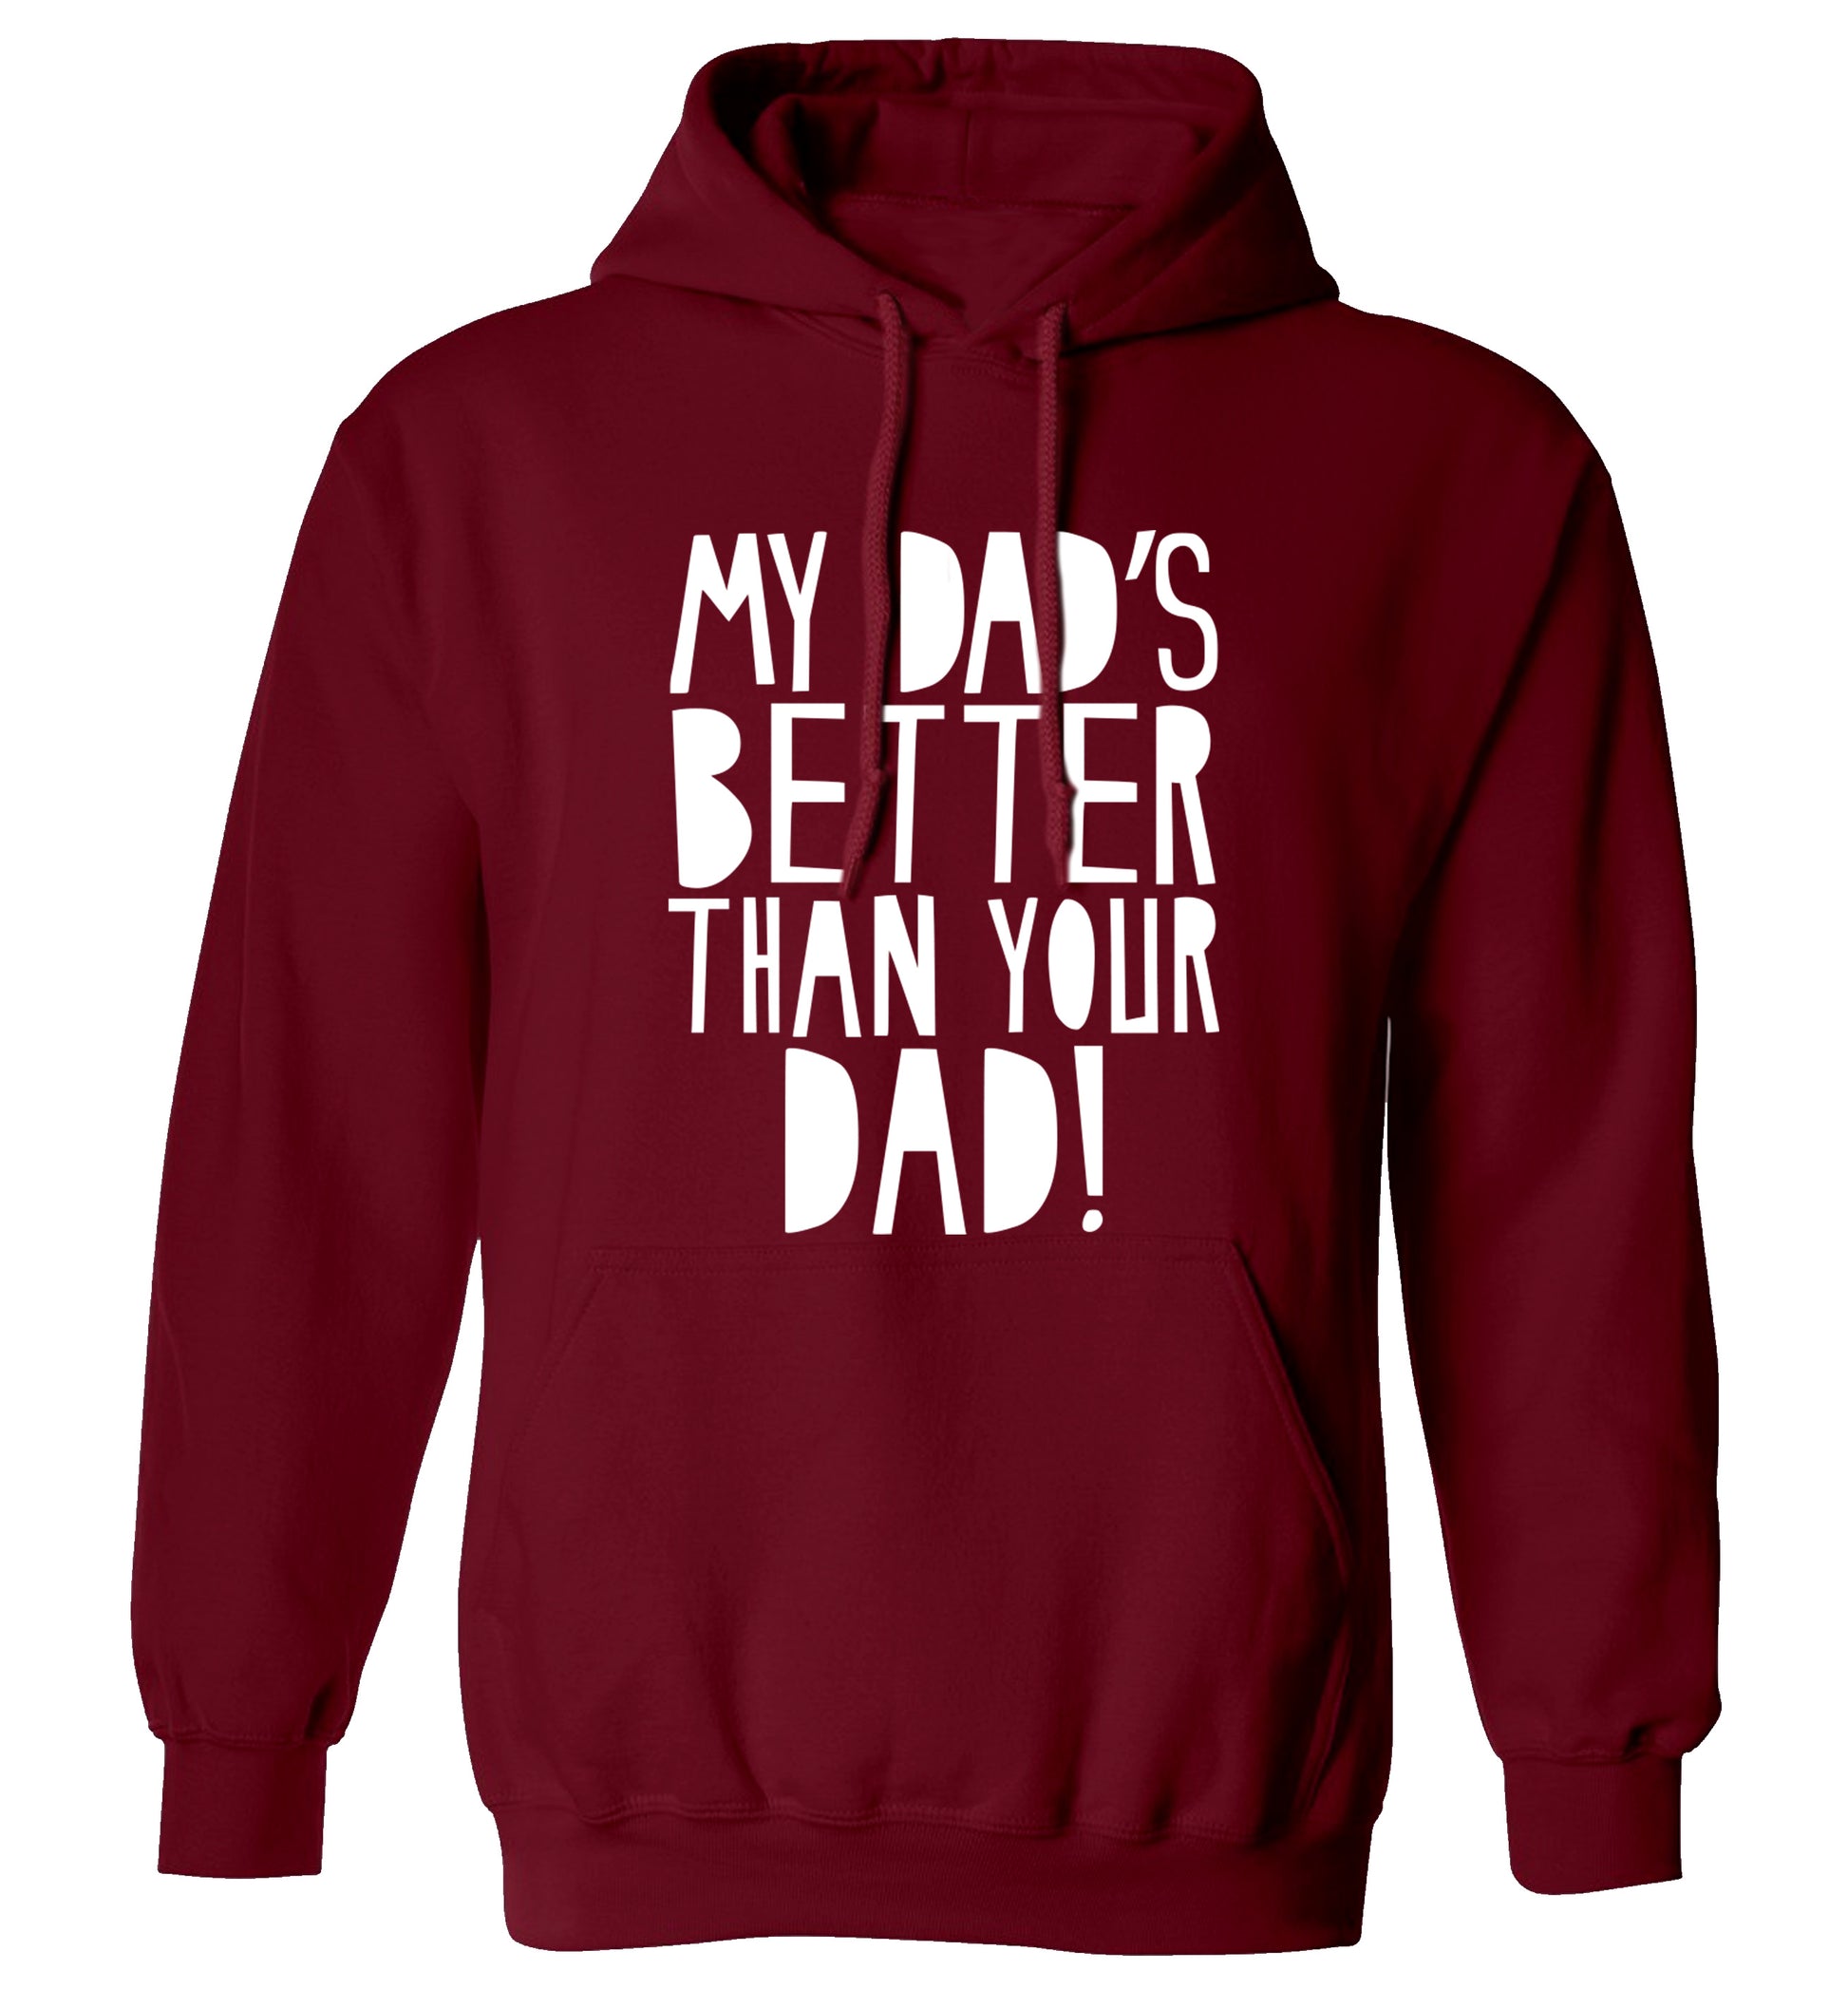 My dad's better than your dad adults unisex maroon hoodie 2XL